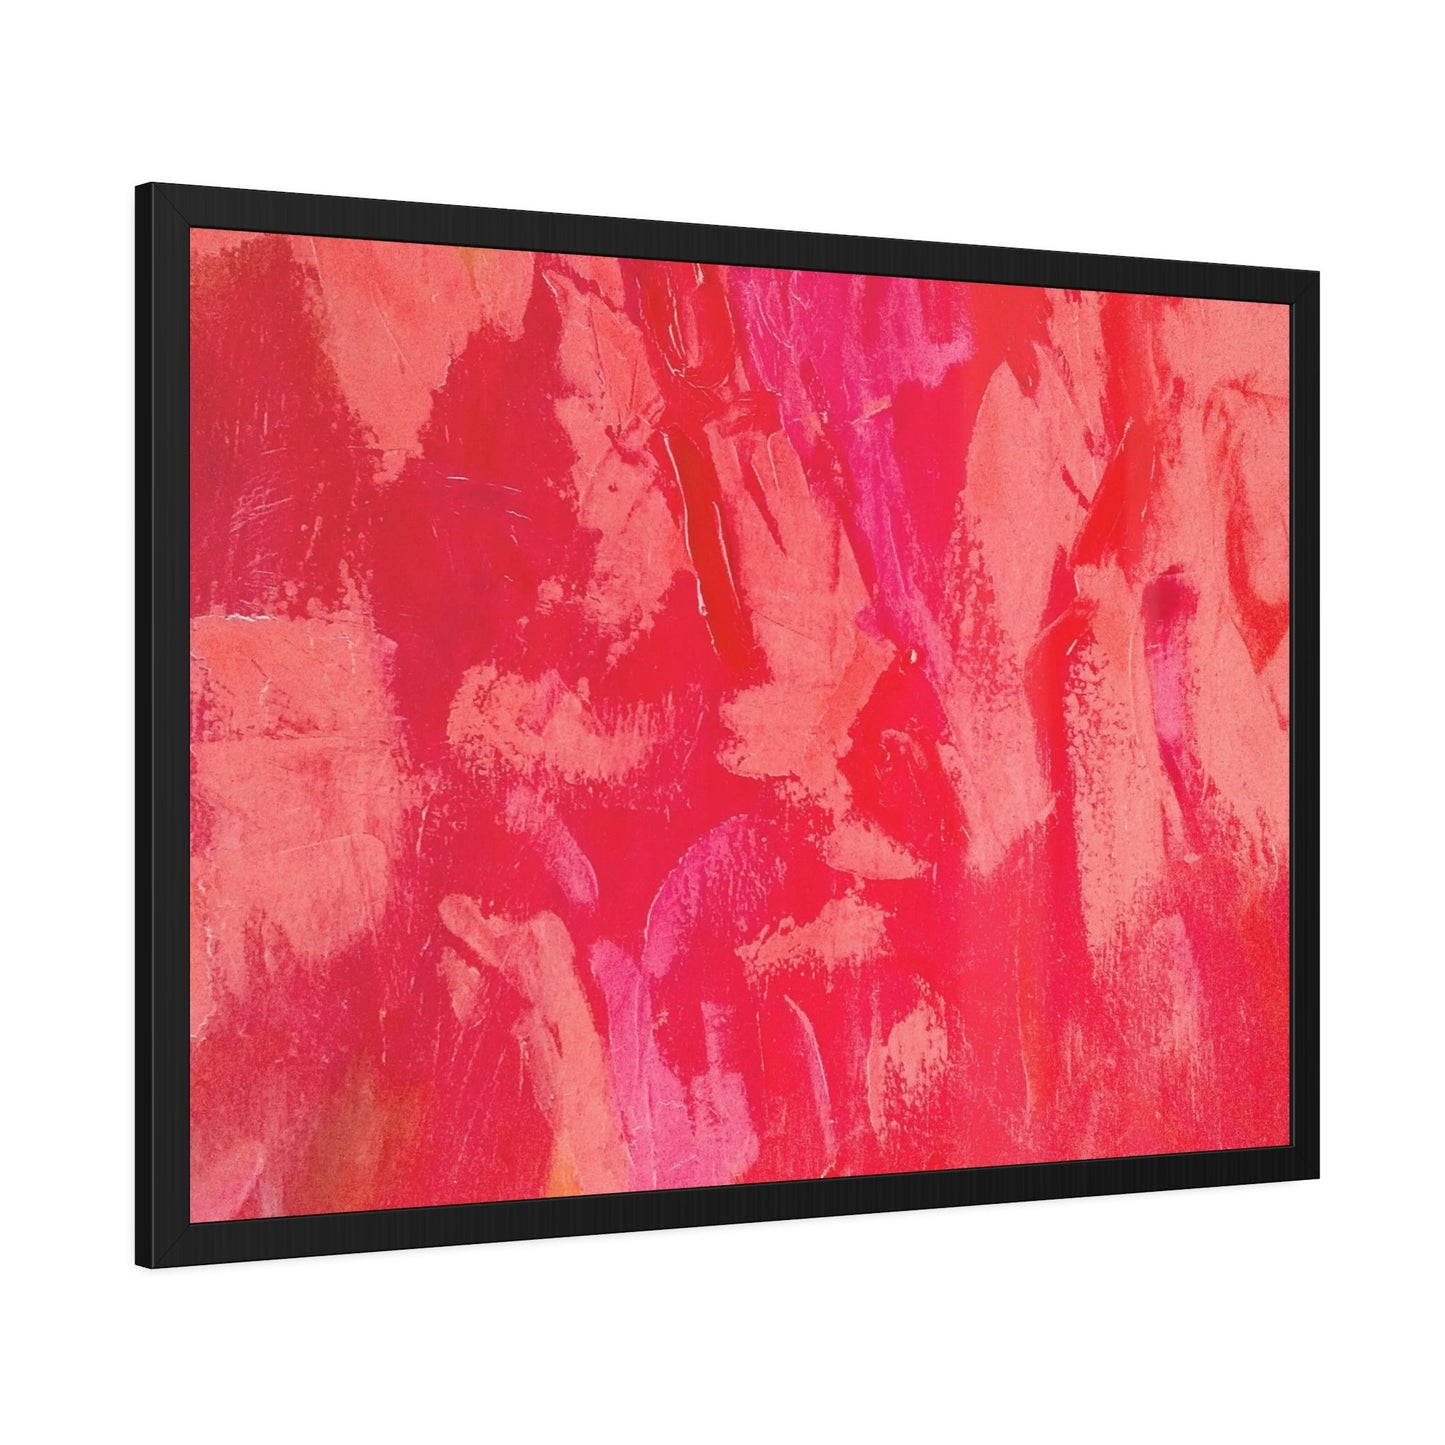 Vibrant Red: A Striking Print on Canvas to Add to Your Art Collection